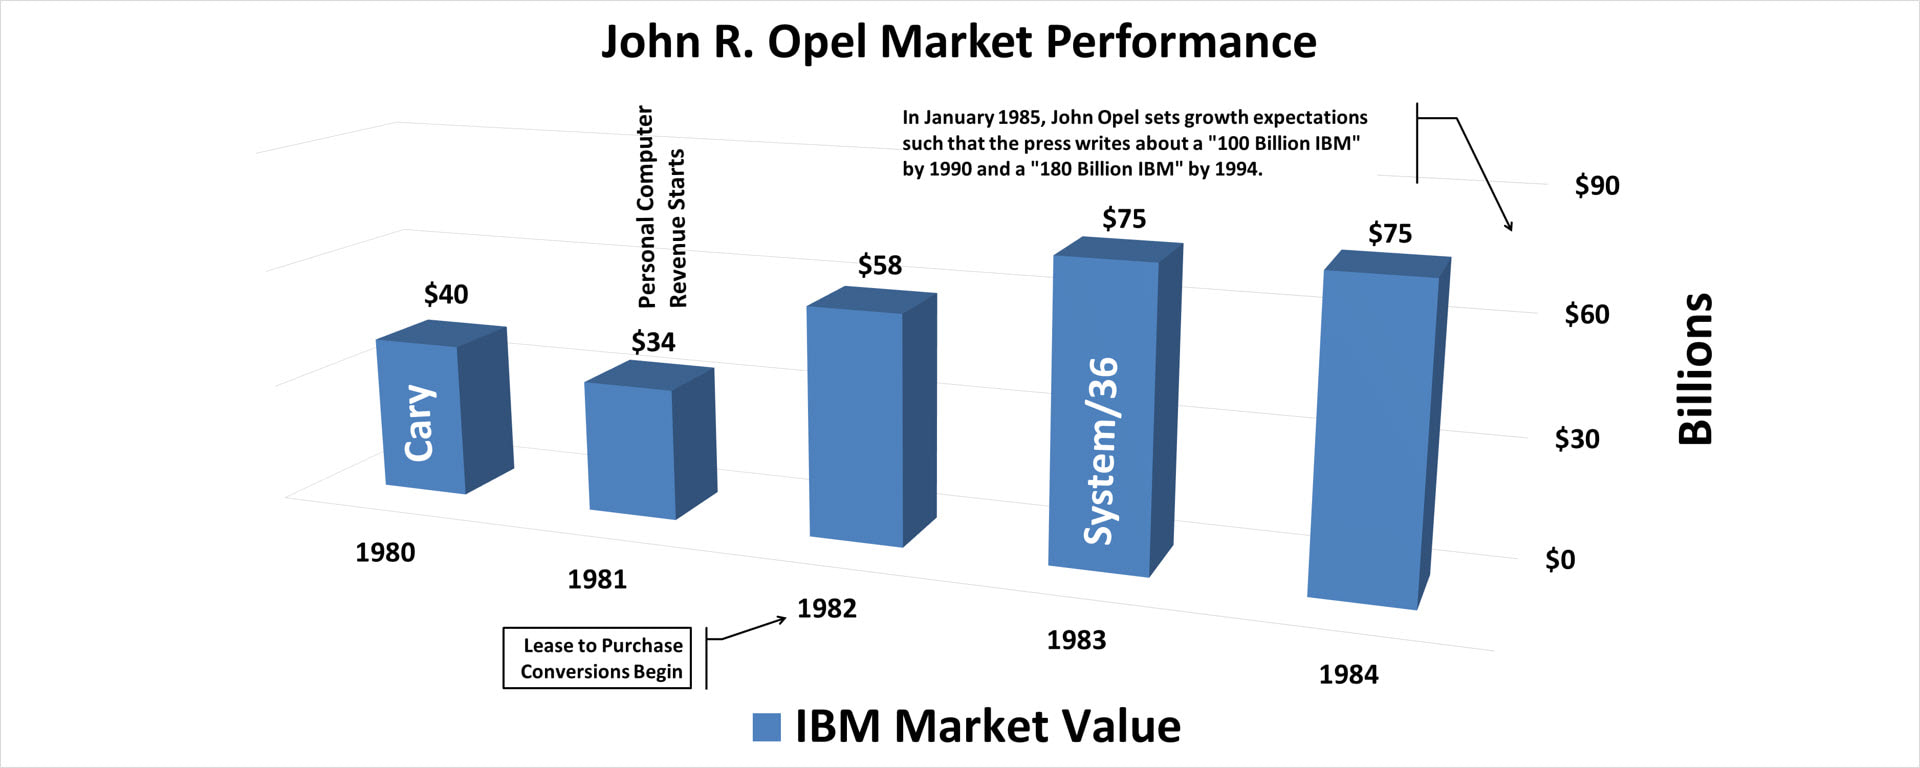 A color bar chart showing IBM's yearly market value from 1980 to 1984 for Chief Executive Officer (CEO) John R. Opel.